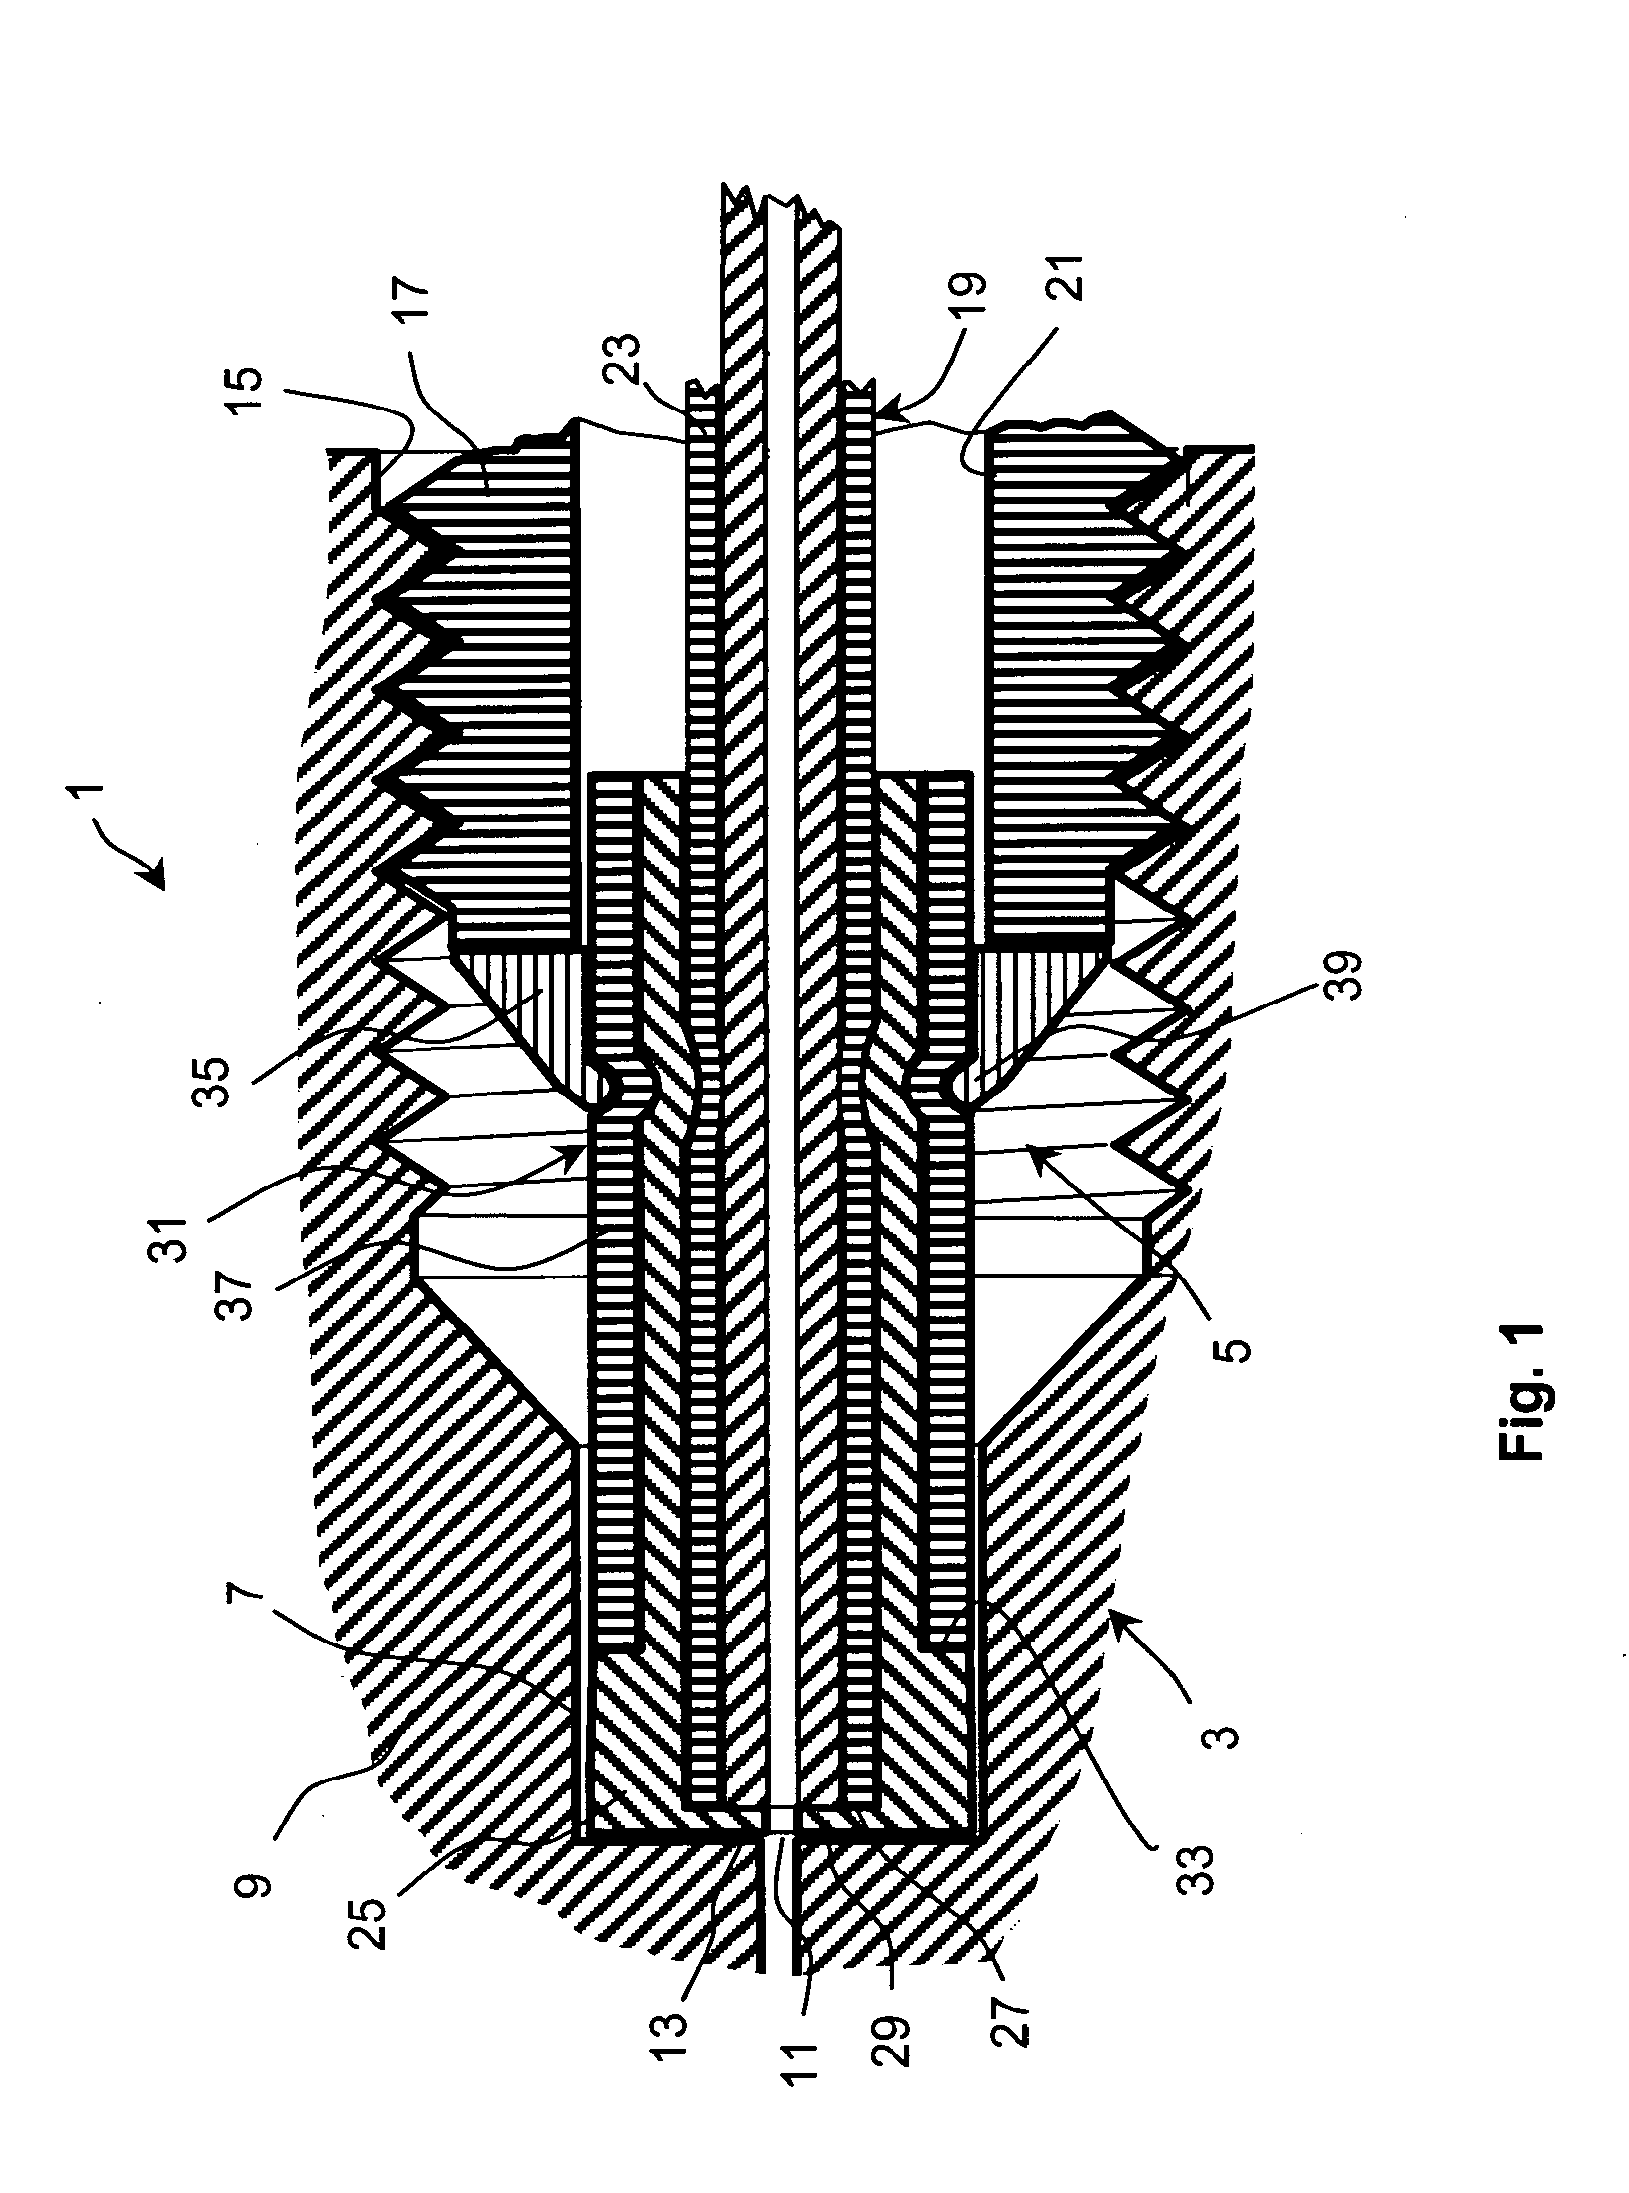 Plug unit and connection system for connecting capillary tubes, especially for high-performance liquid chromatography